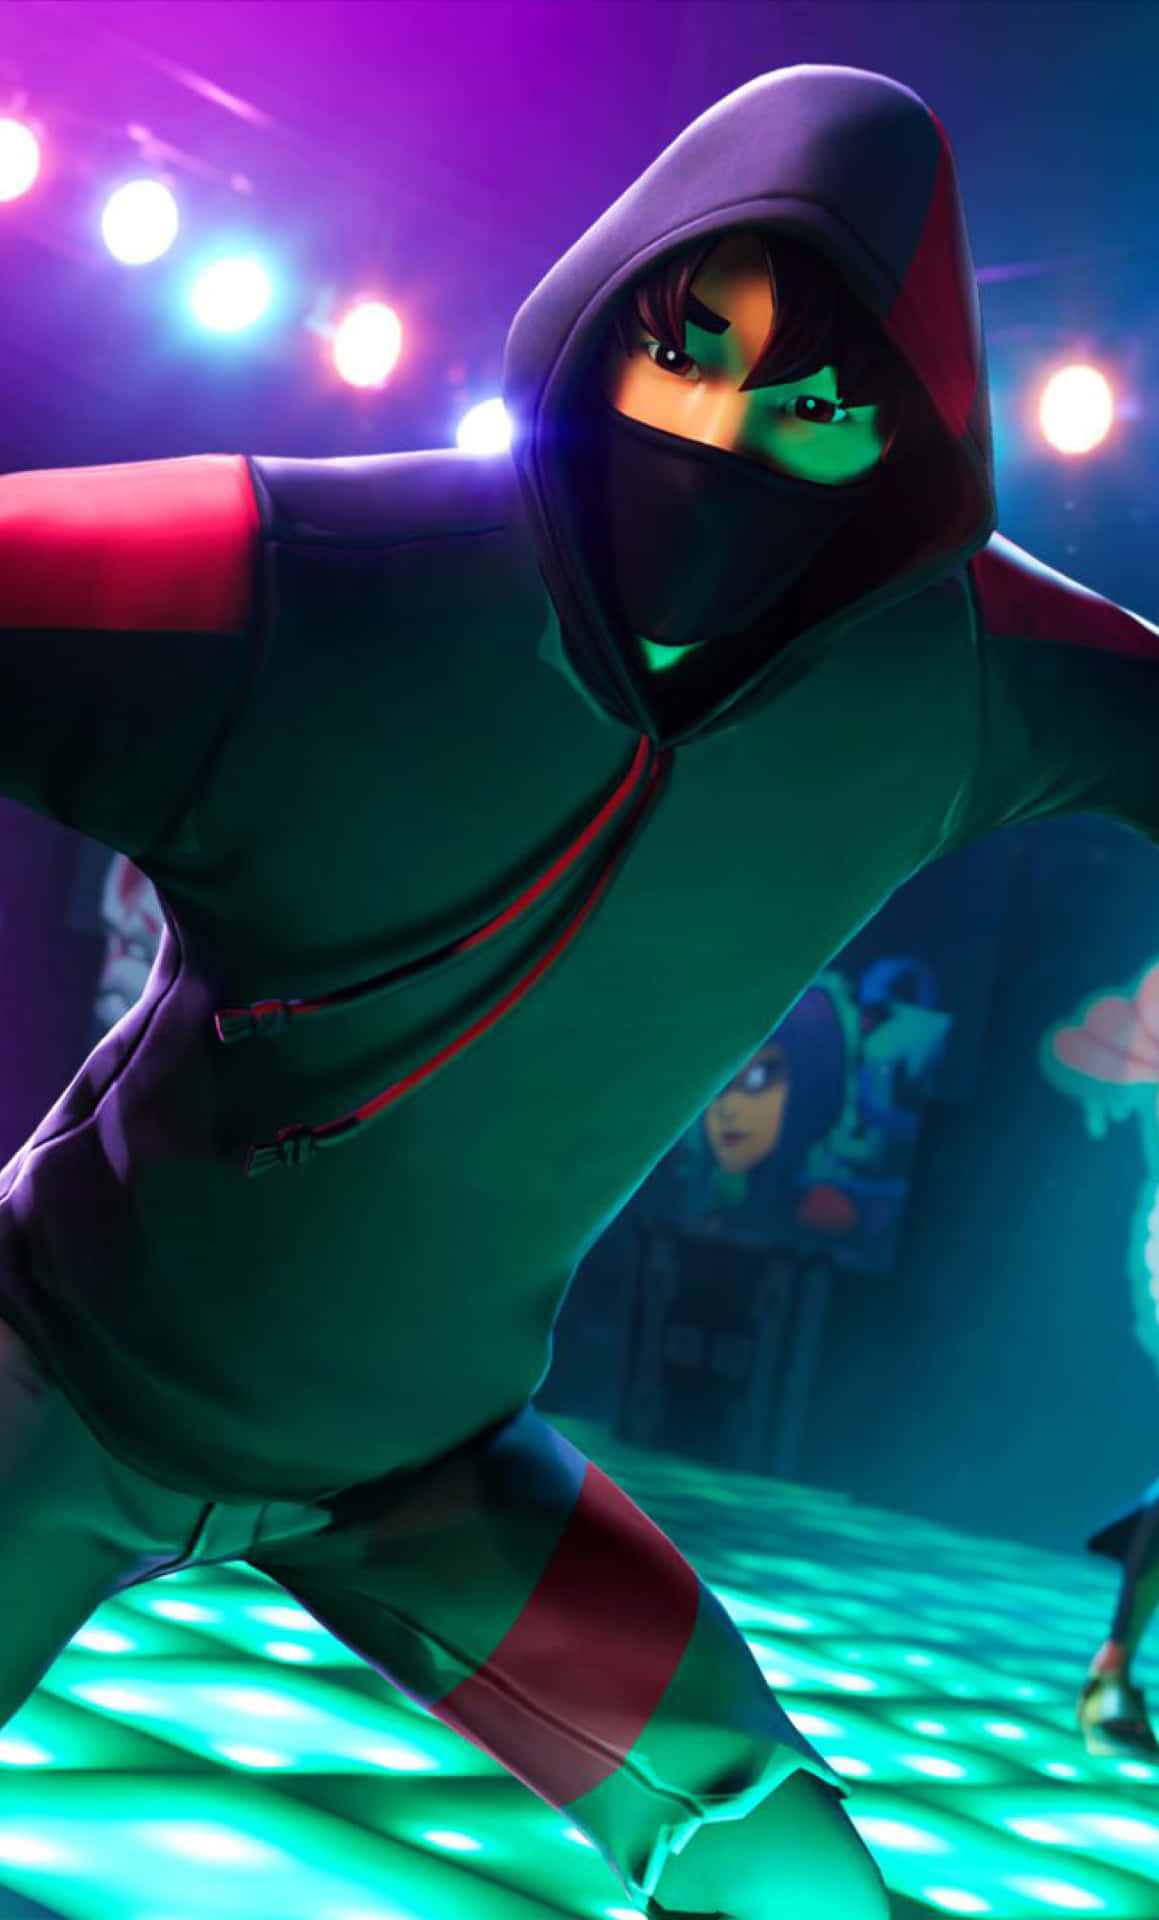 Unlock the style upgrade for ultimate success with the Fortnite Ikonik Skin. Wallpaper